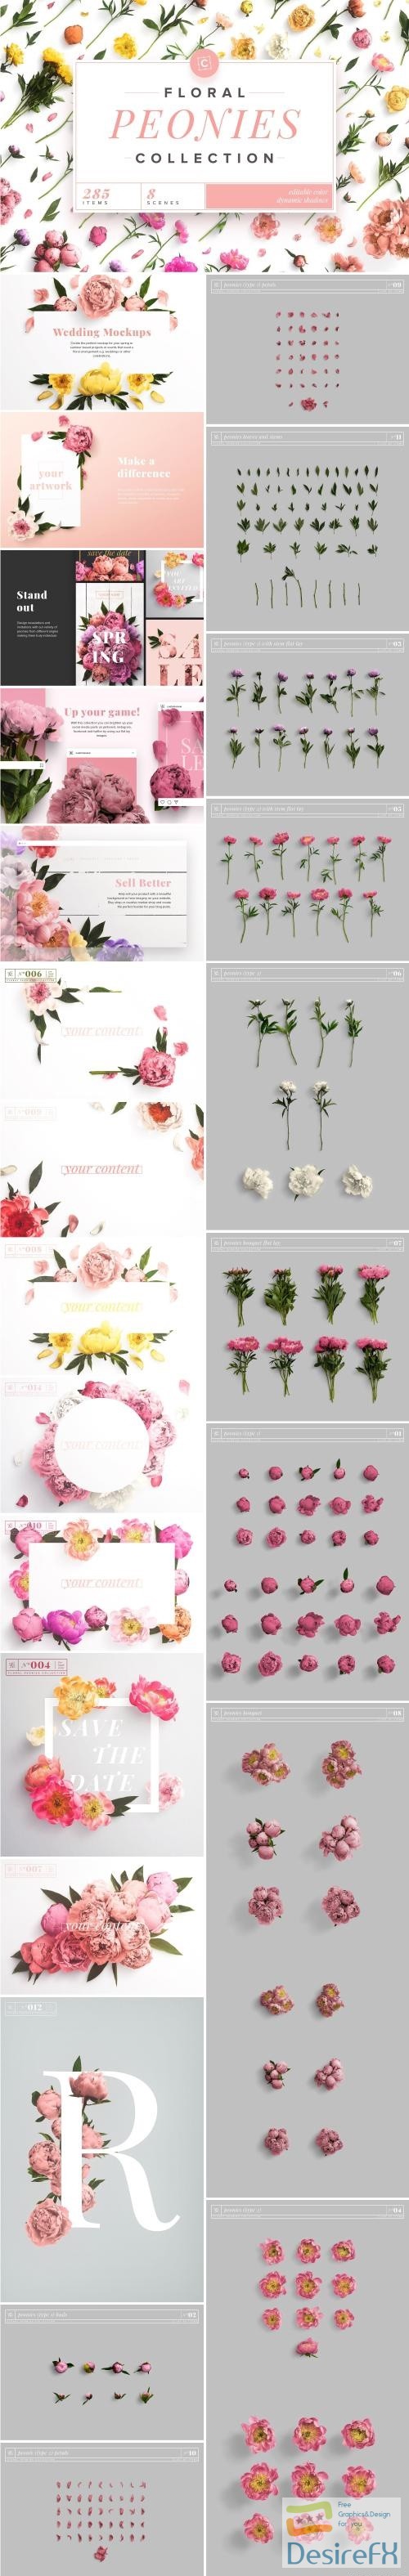 Floral Peonies Collection - 2303528